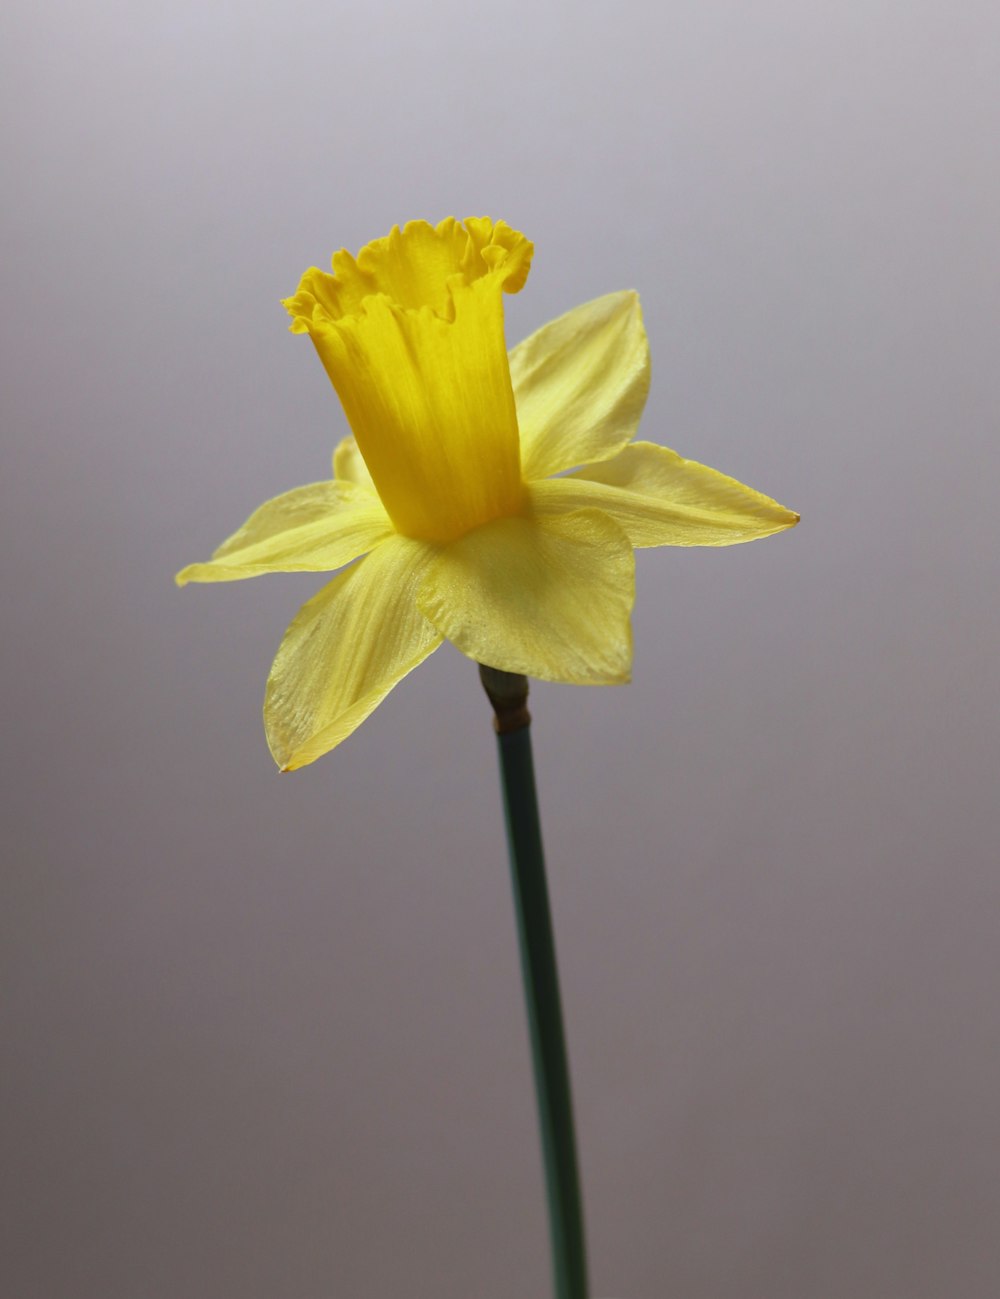 a single yellow daffodil flower in a vase